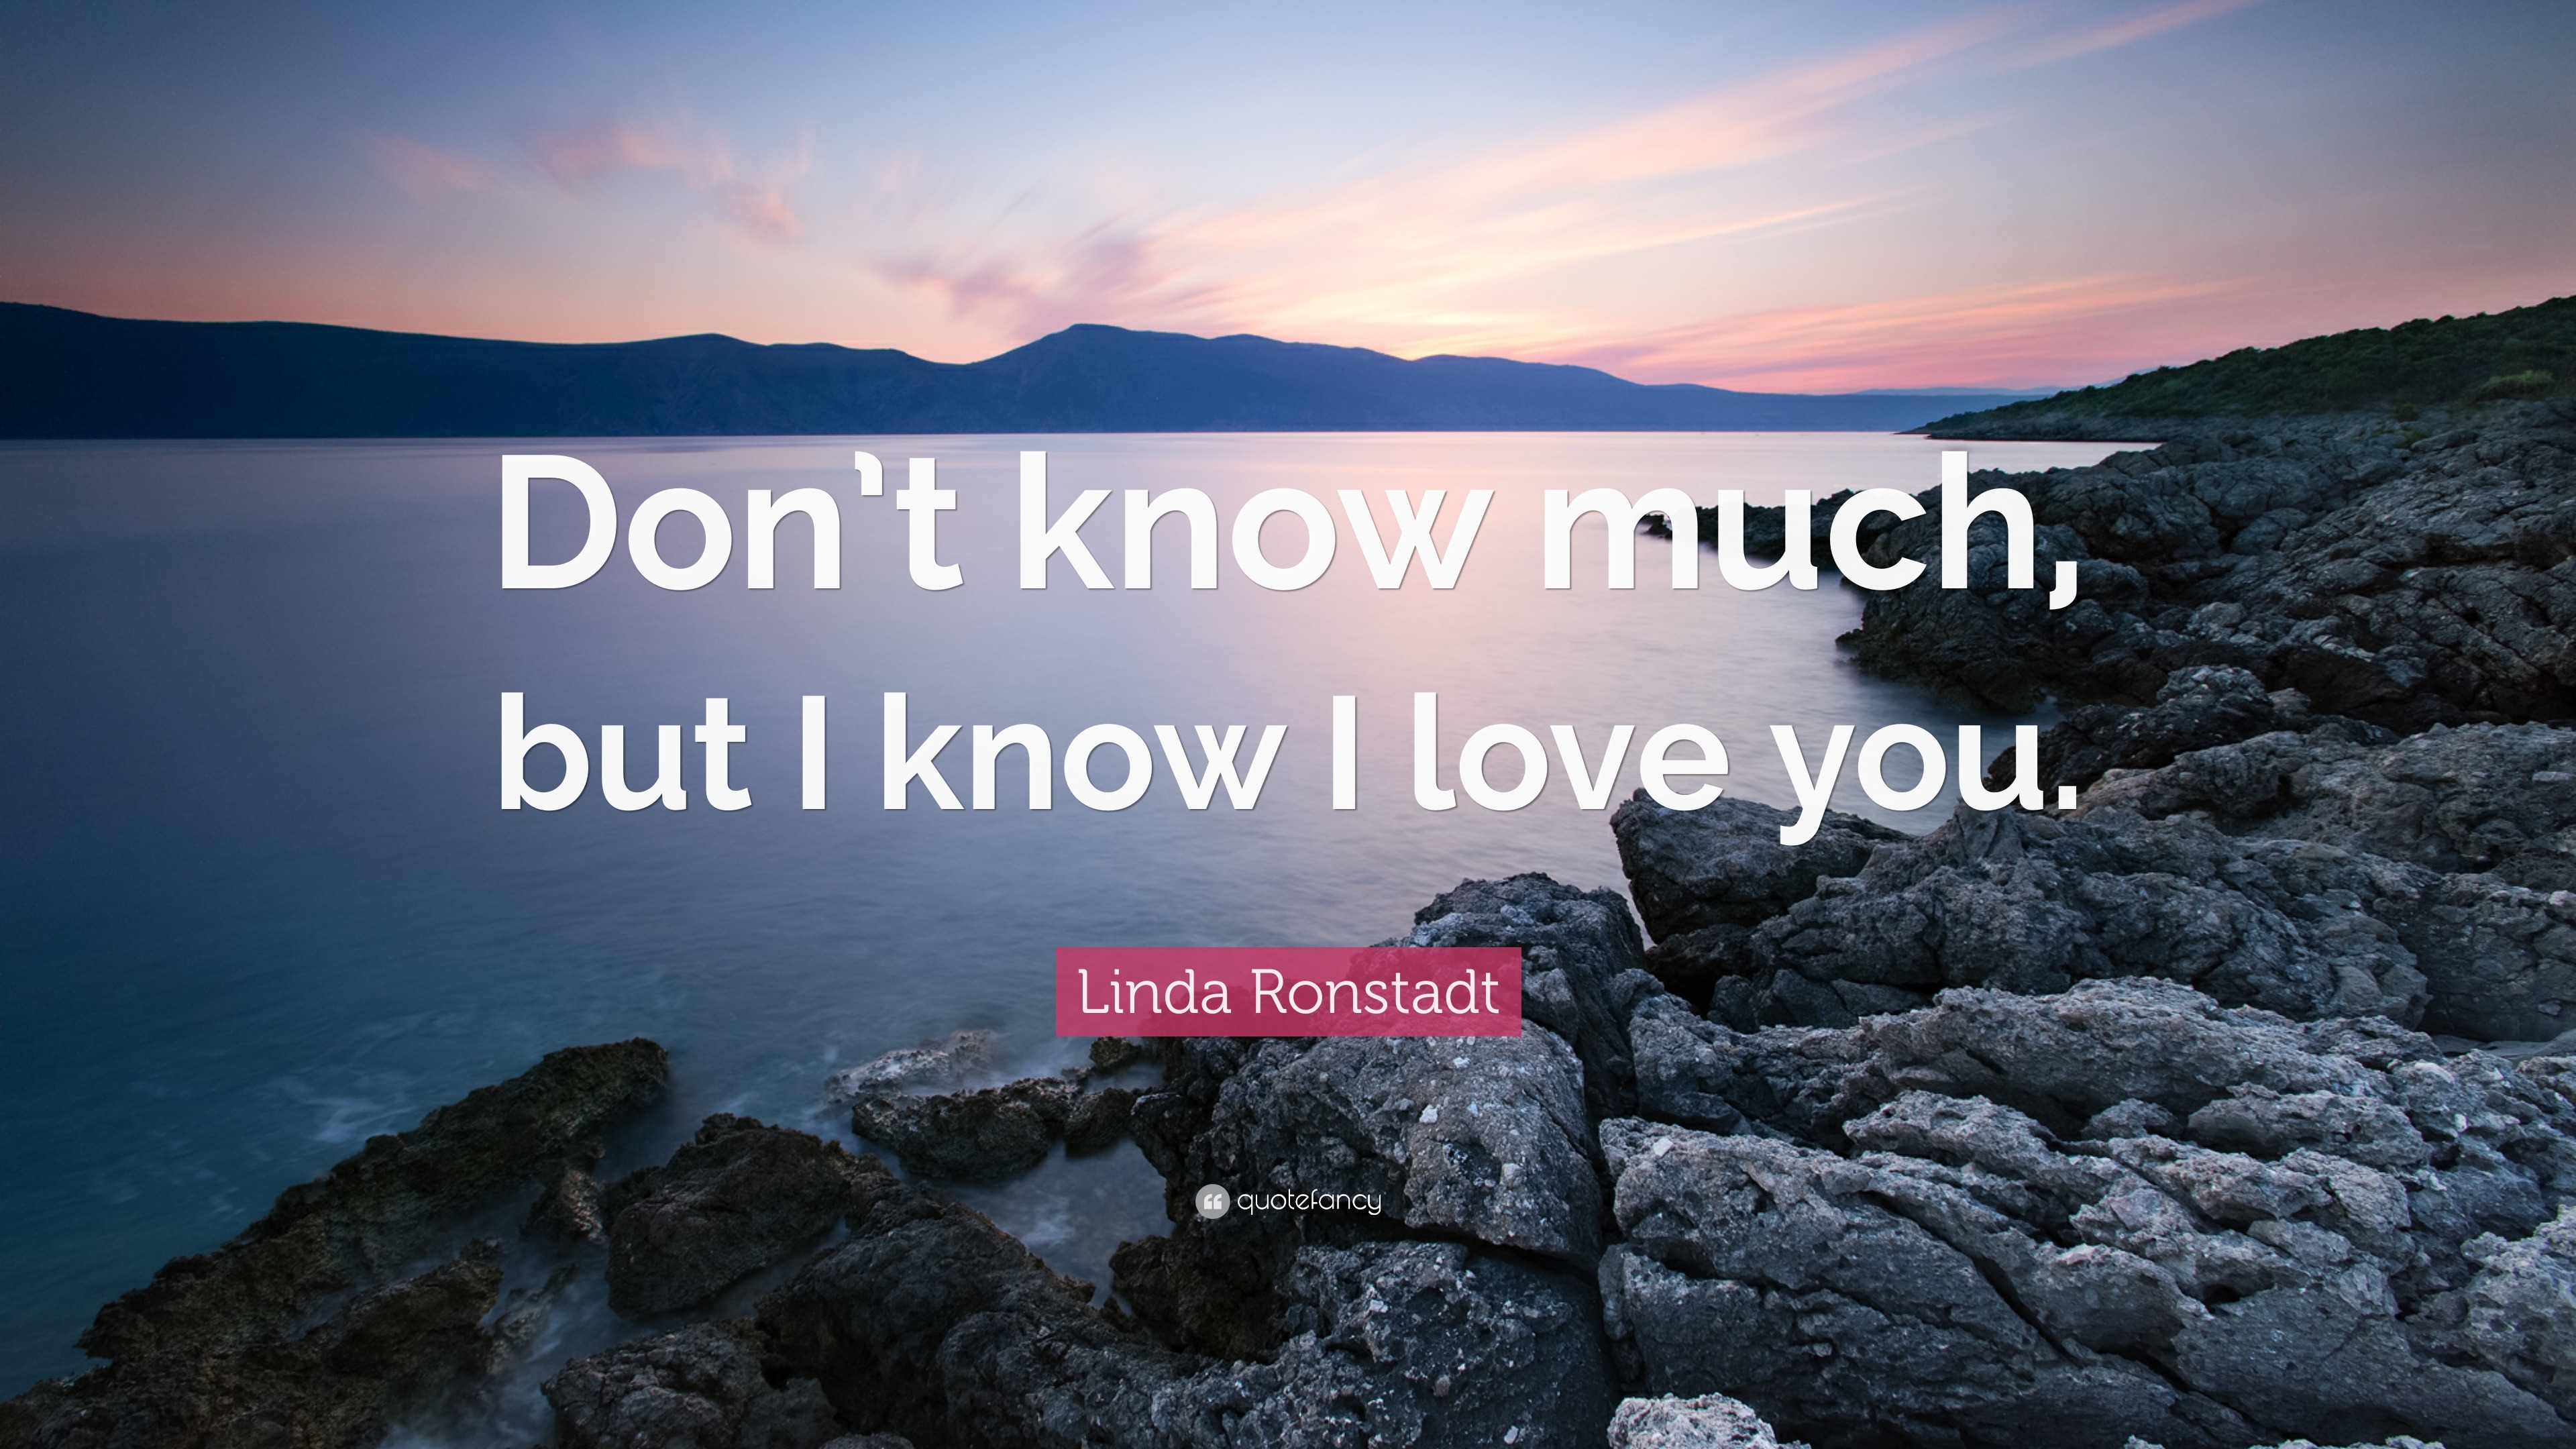 Linda Ronstadt Quote Don T Know Much But I Know I Love You 12 Wallpapers Quotefancy